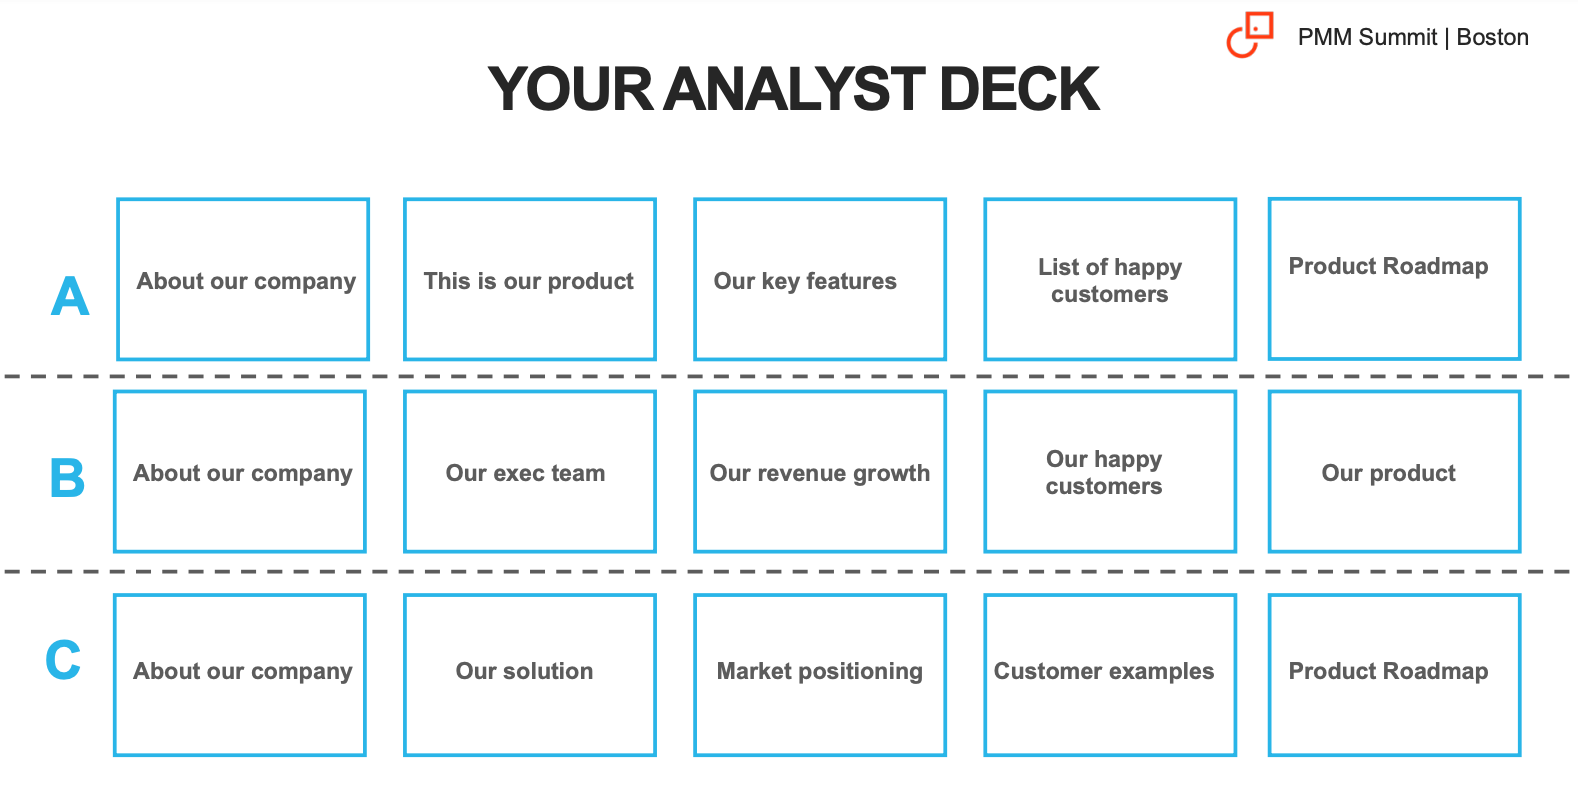 Your analyst deck: A, B, or C.